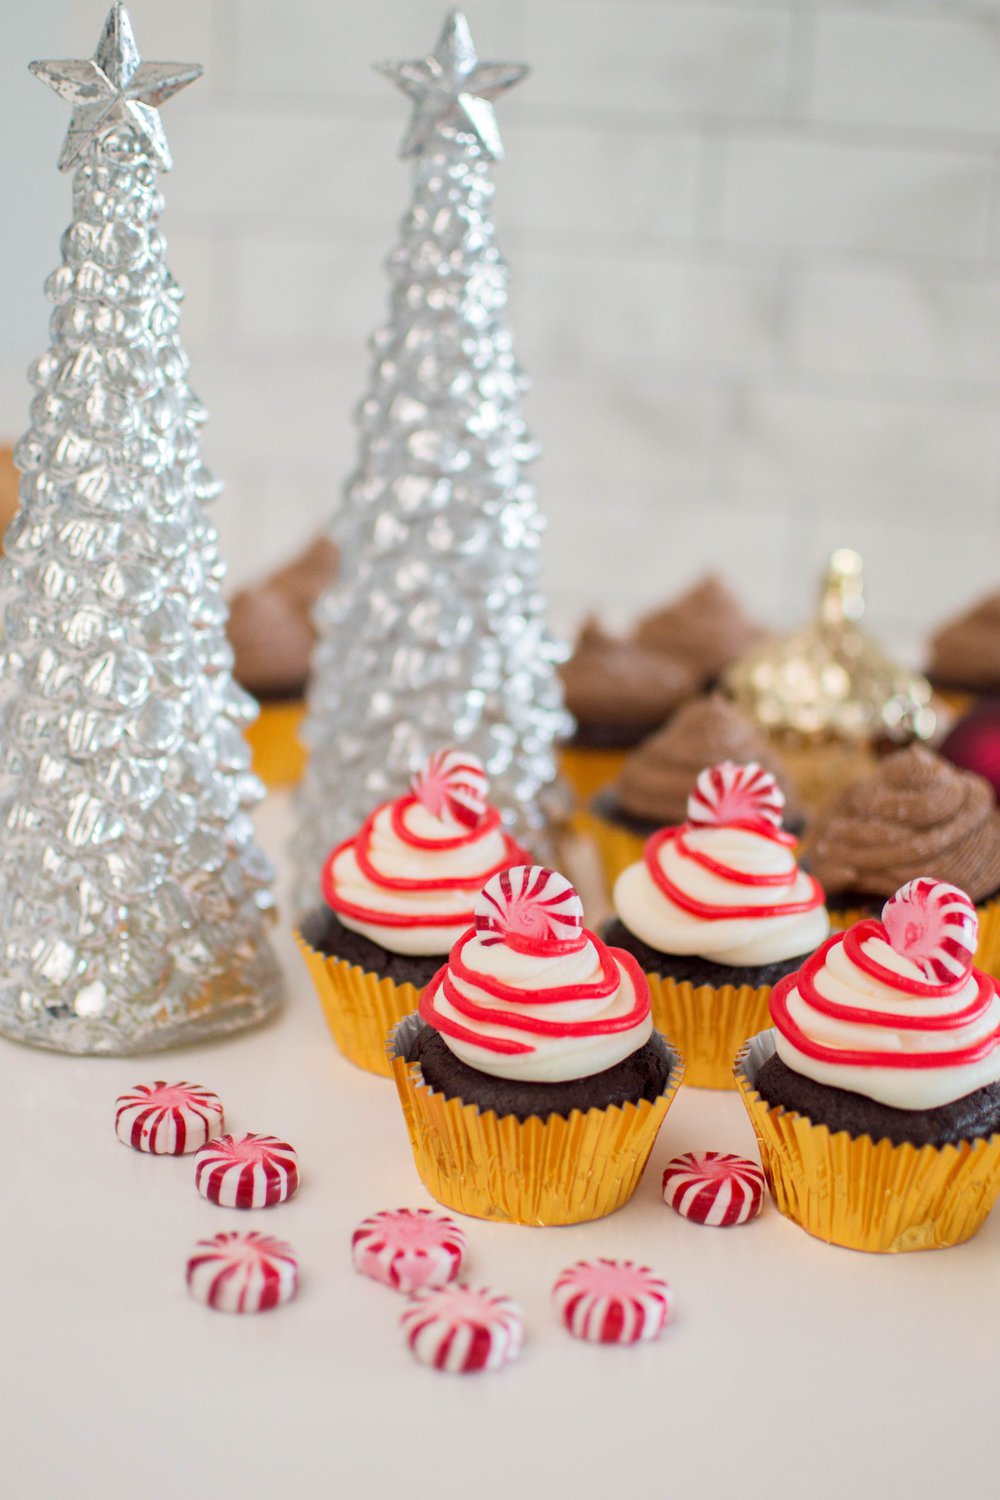 Our recipe for peppermint frosting only requires four ingredients and makes a flavorful impact to your cupcakes. Top a generous amount on a batch of your favourite chocolate cupcakes, and you’ve got yourself a holiday dessert that everyone will appreciate!